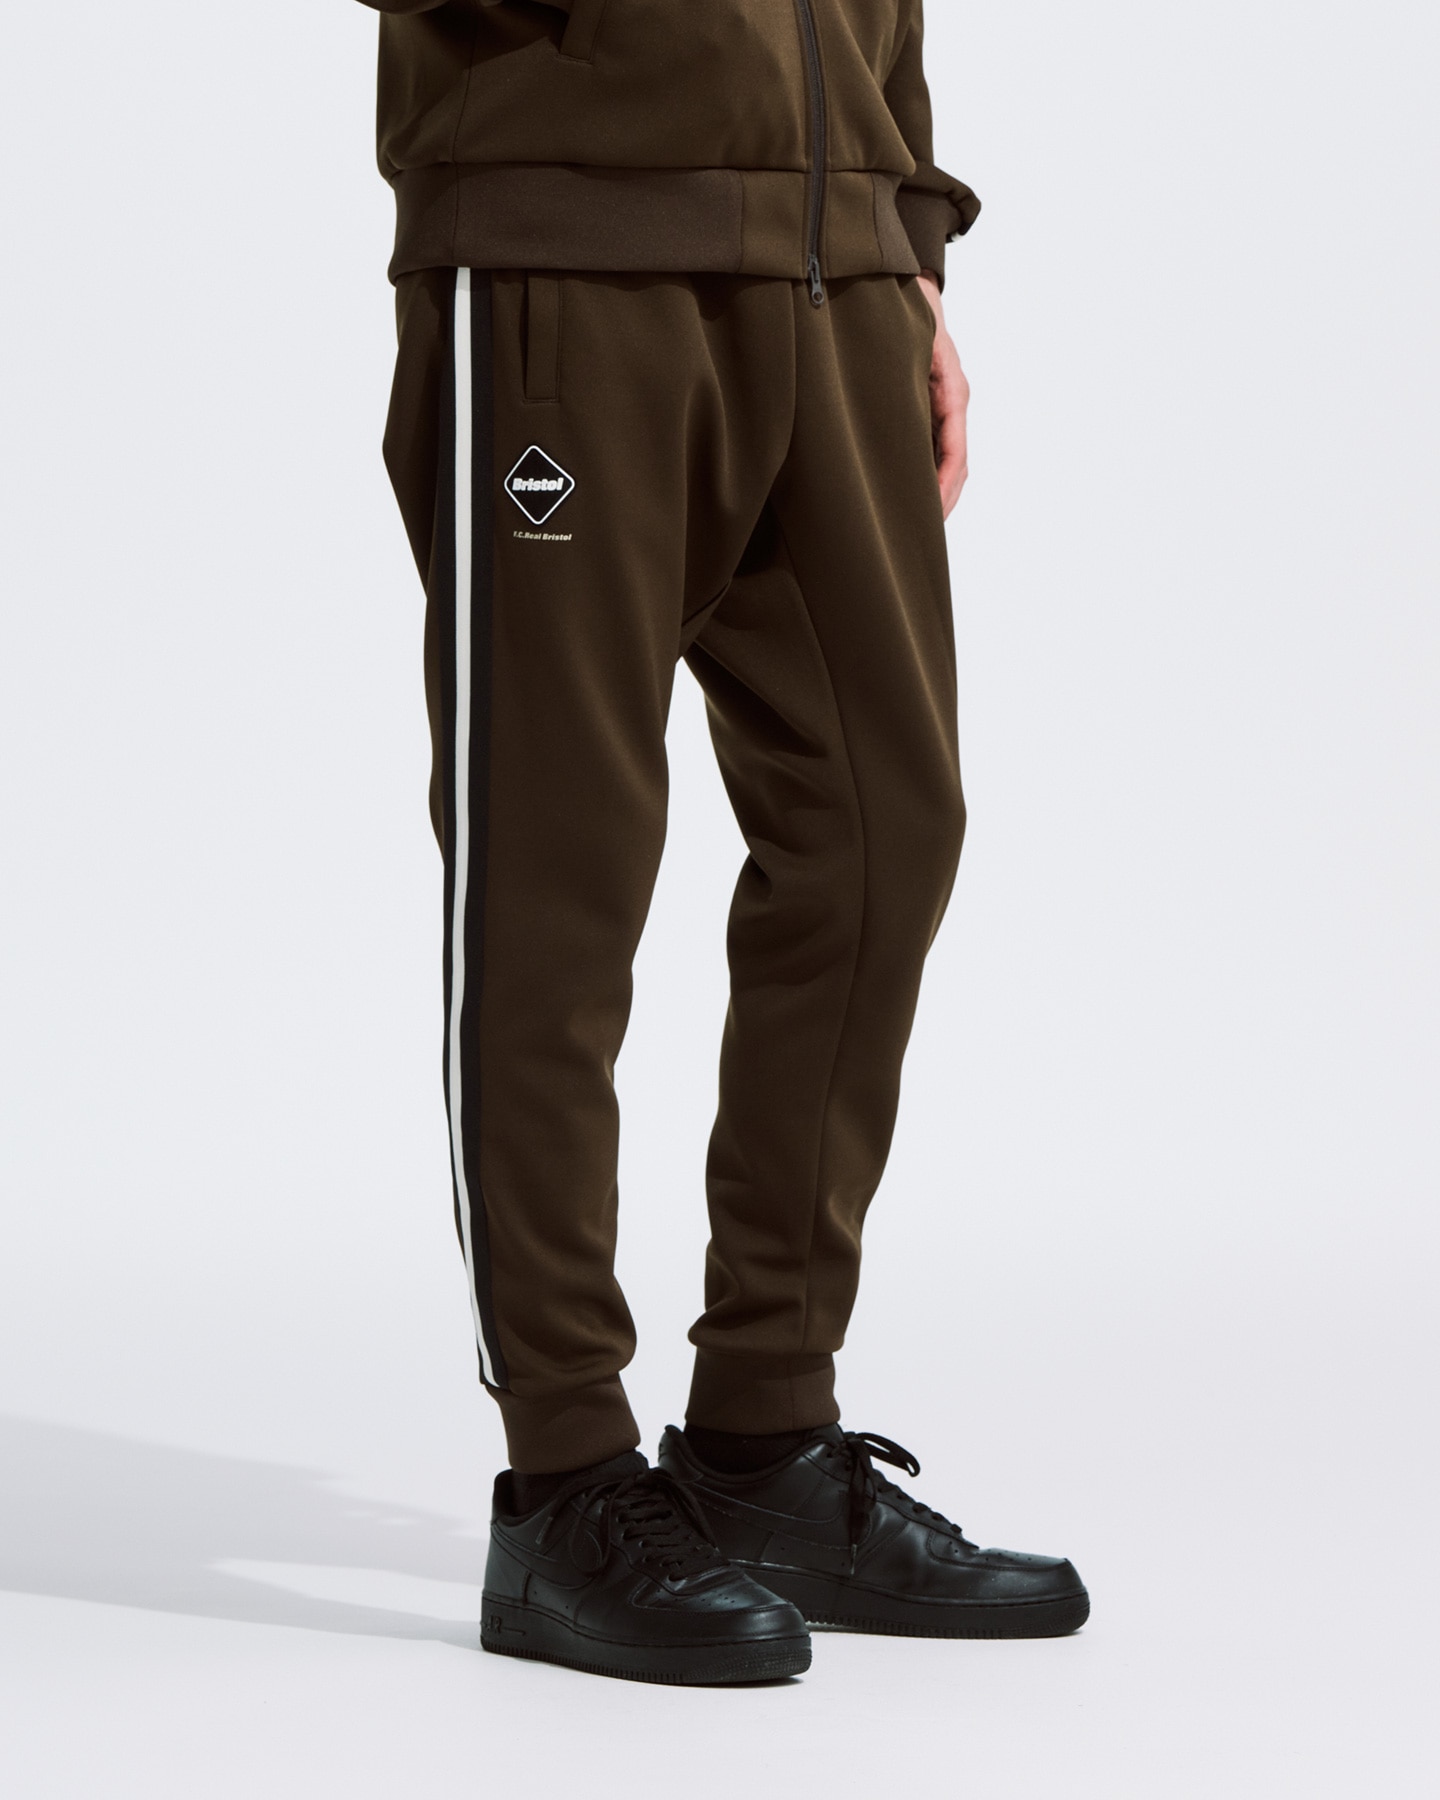 SOPH. | TRAINING TRACK RIBBED PANTS(M BROWN):